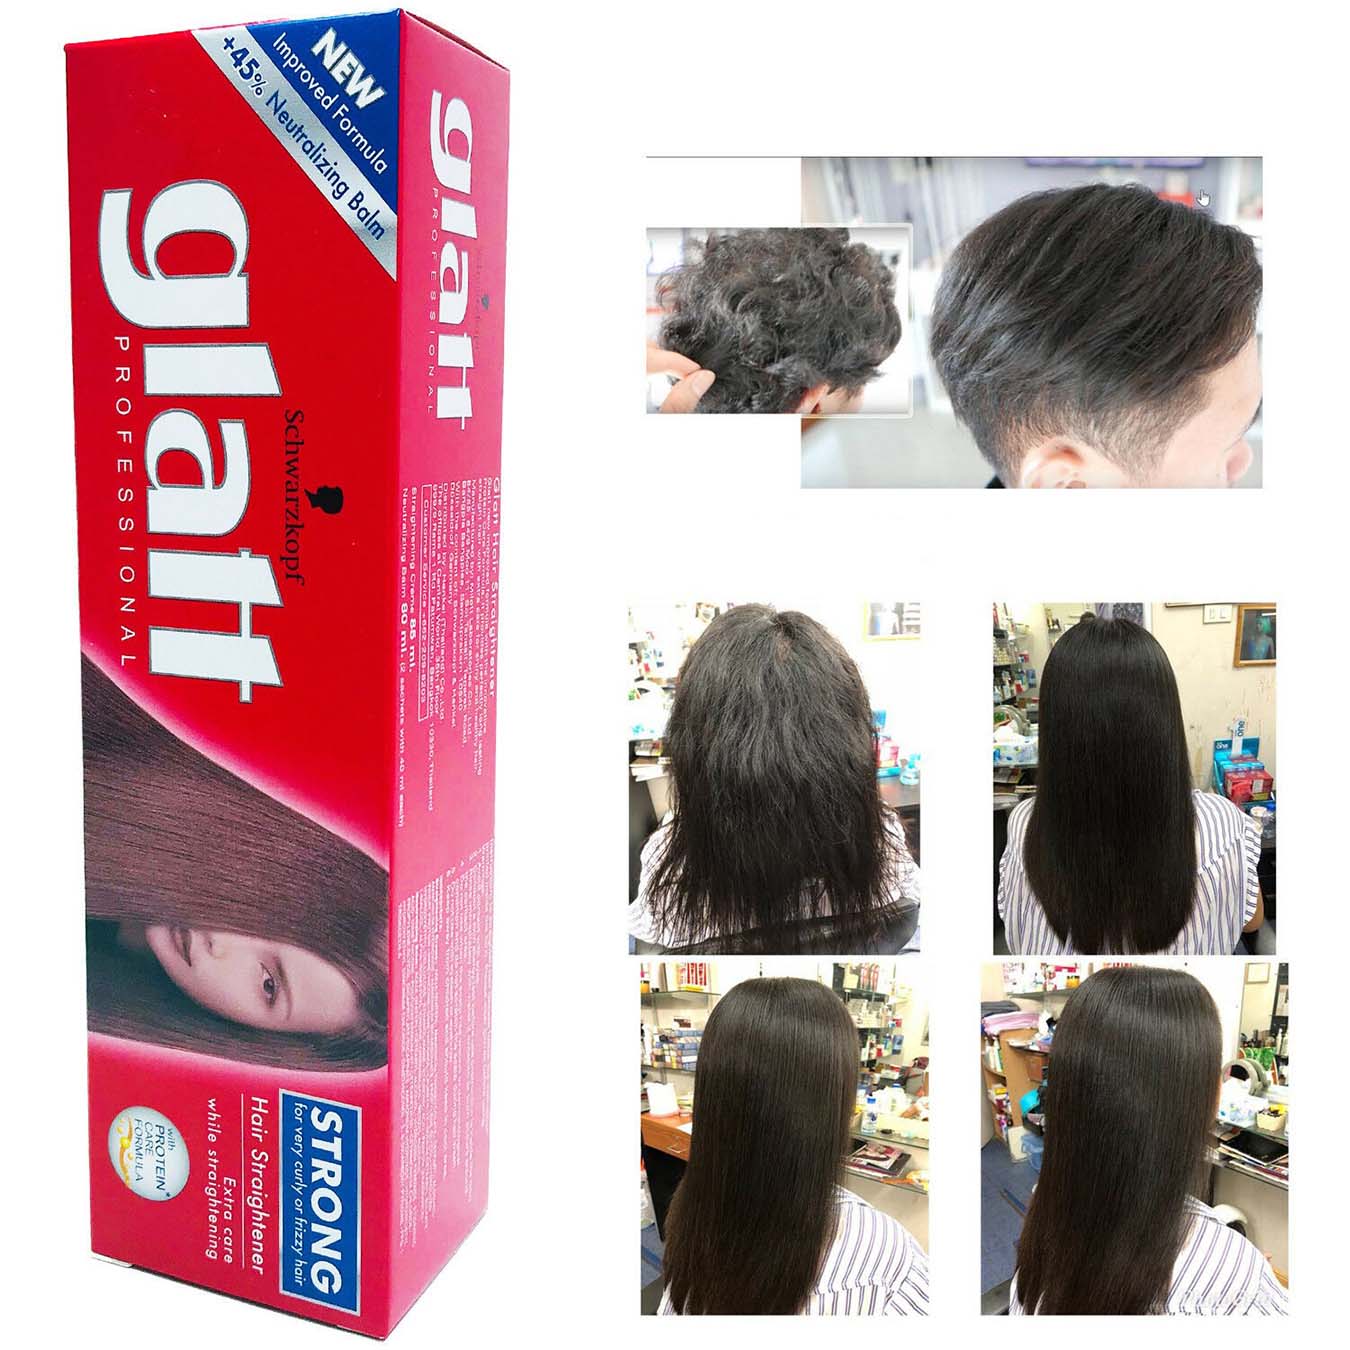 Hair Straightening Creams For Smooth And Silky Hair Times Of India |  Protein Hair Straightening Cream, Silk Gloss Hair Straightening Cream Kit |  